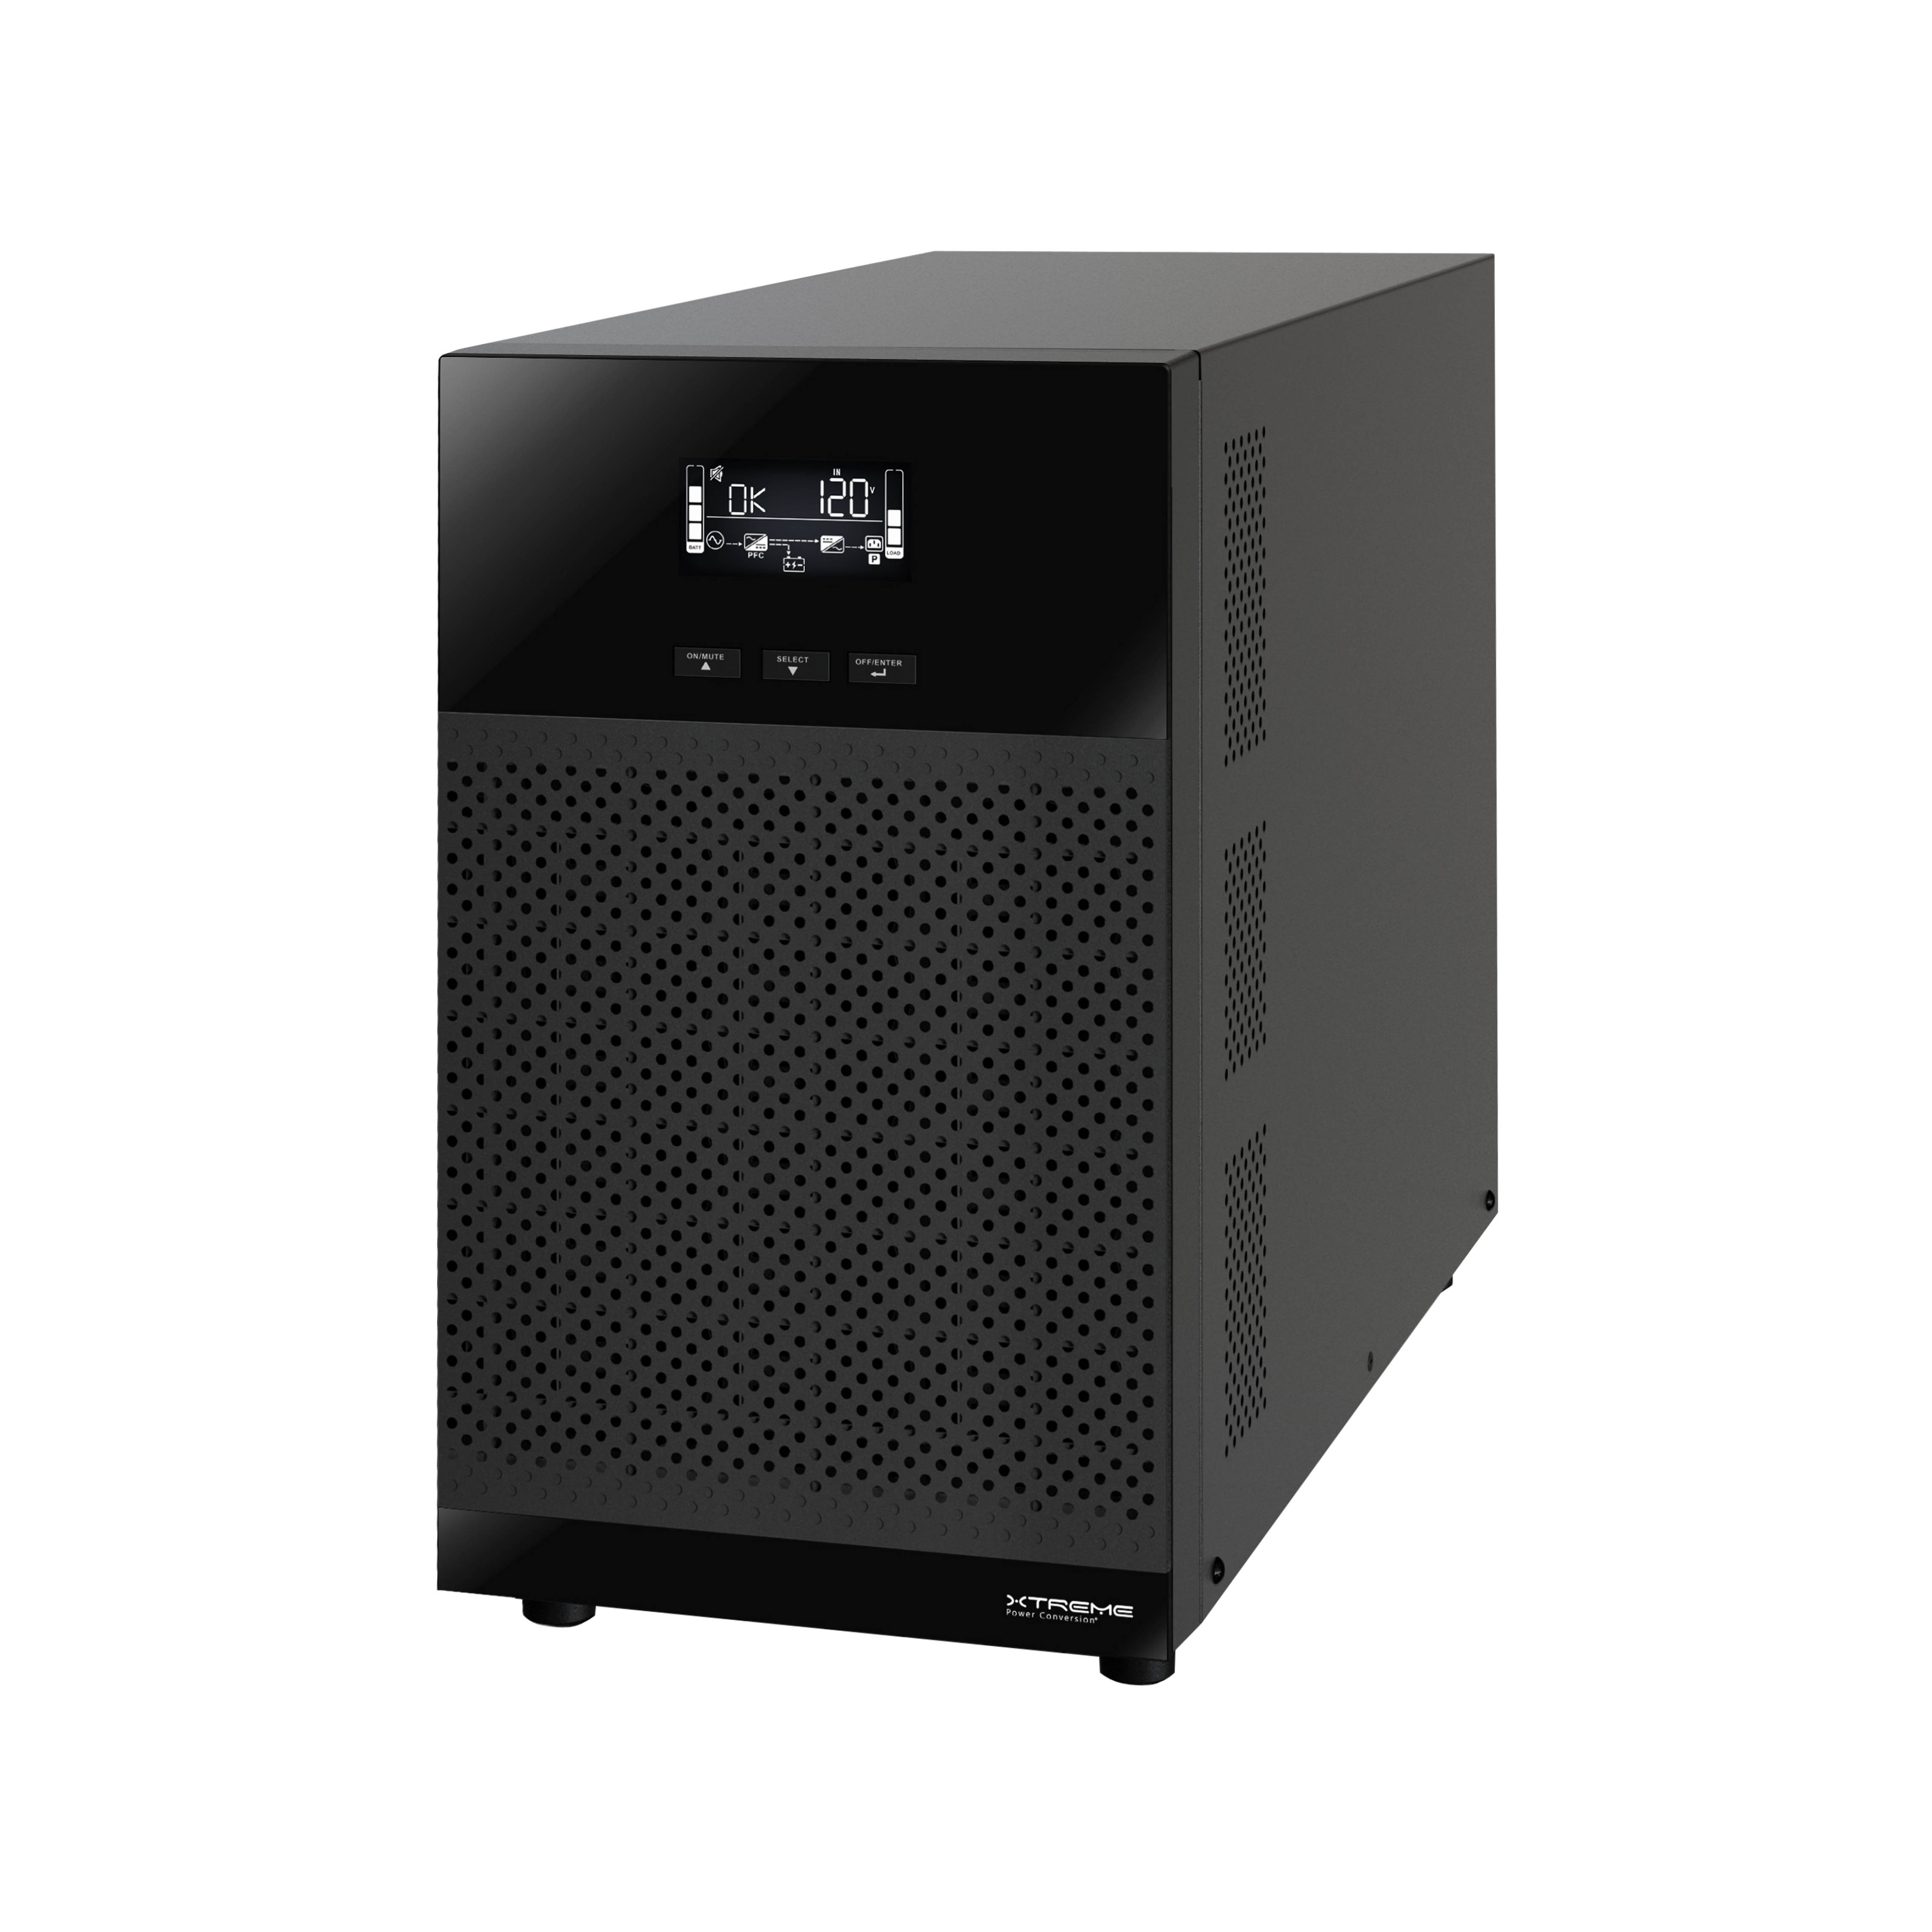 3kVA Tower Online UPS 120V Double Conversion